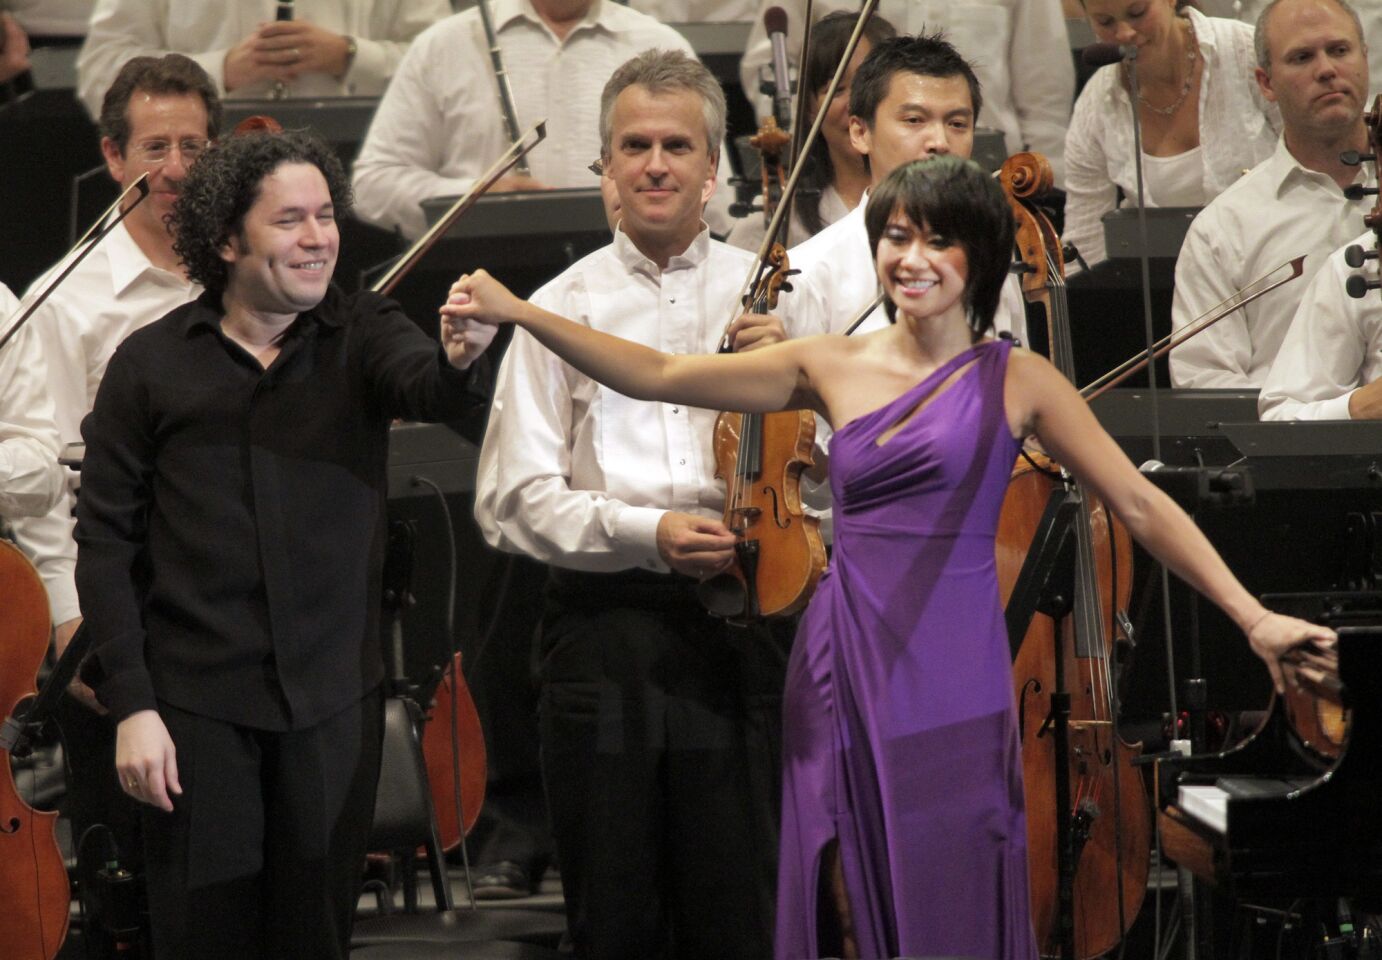 Arts and culture in pictures by The Times | Gustavo Dudamel and Yuja Wang at the Bowl